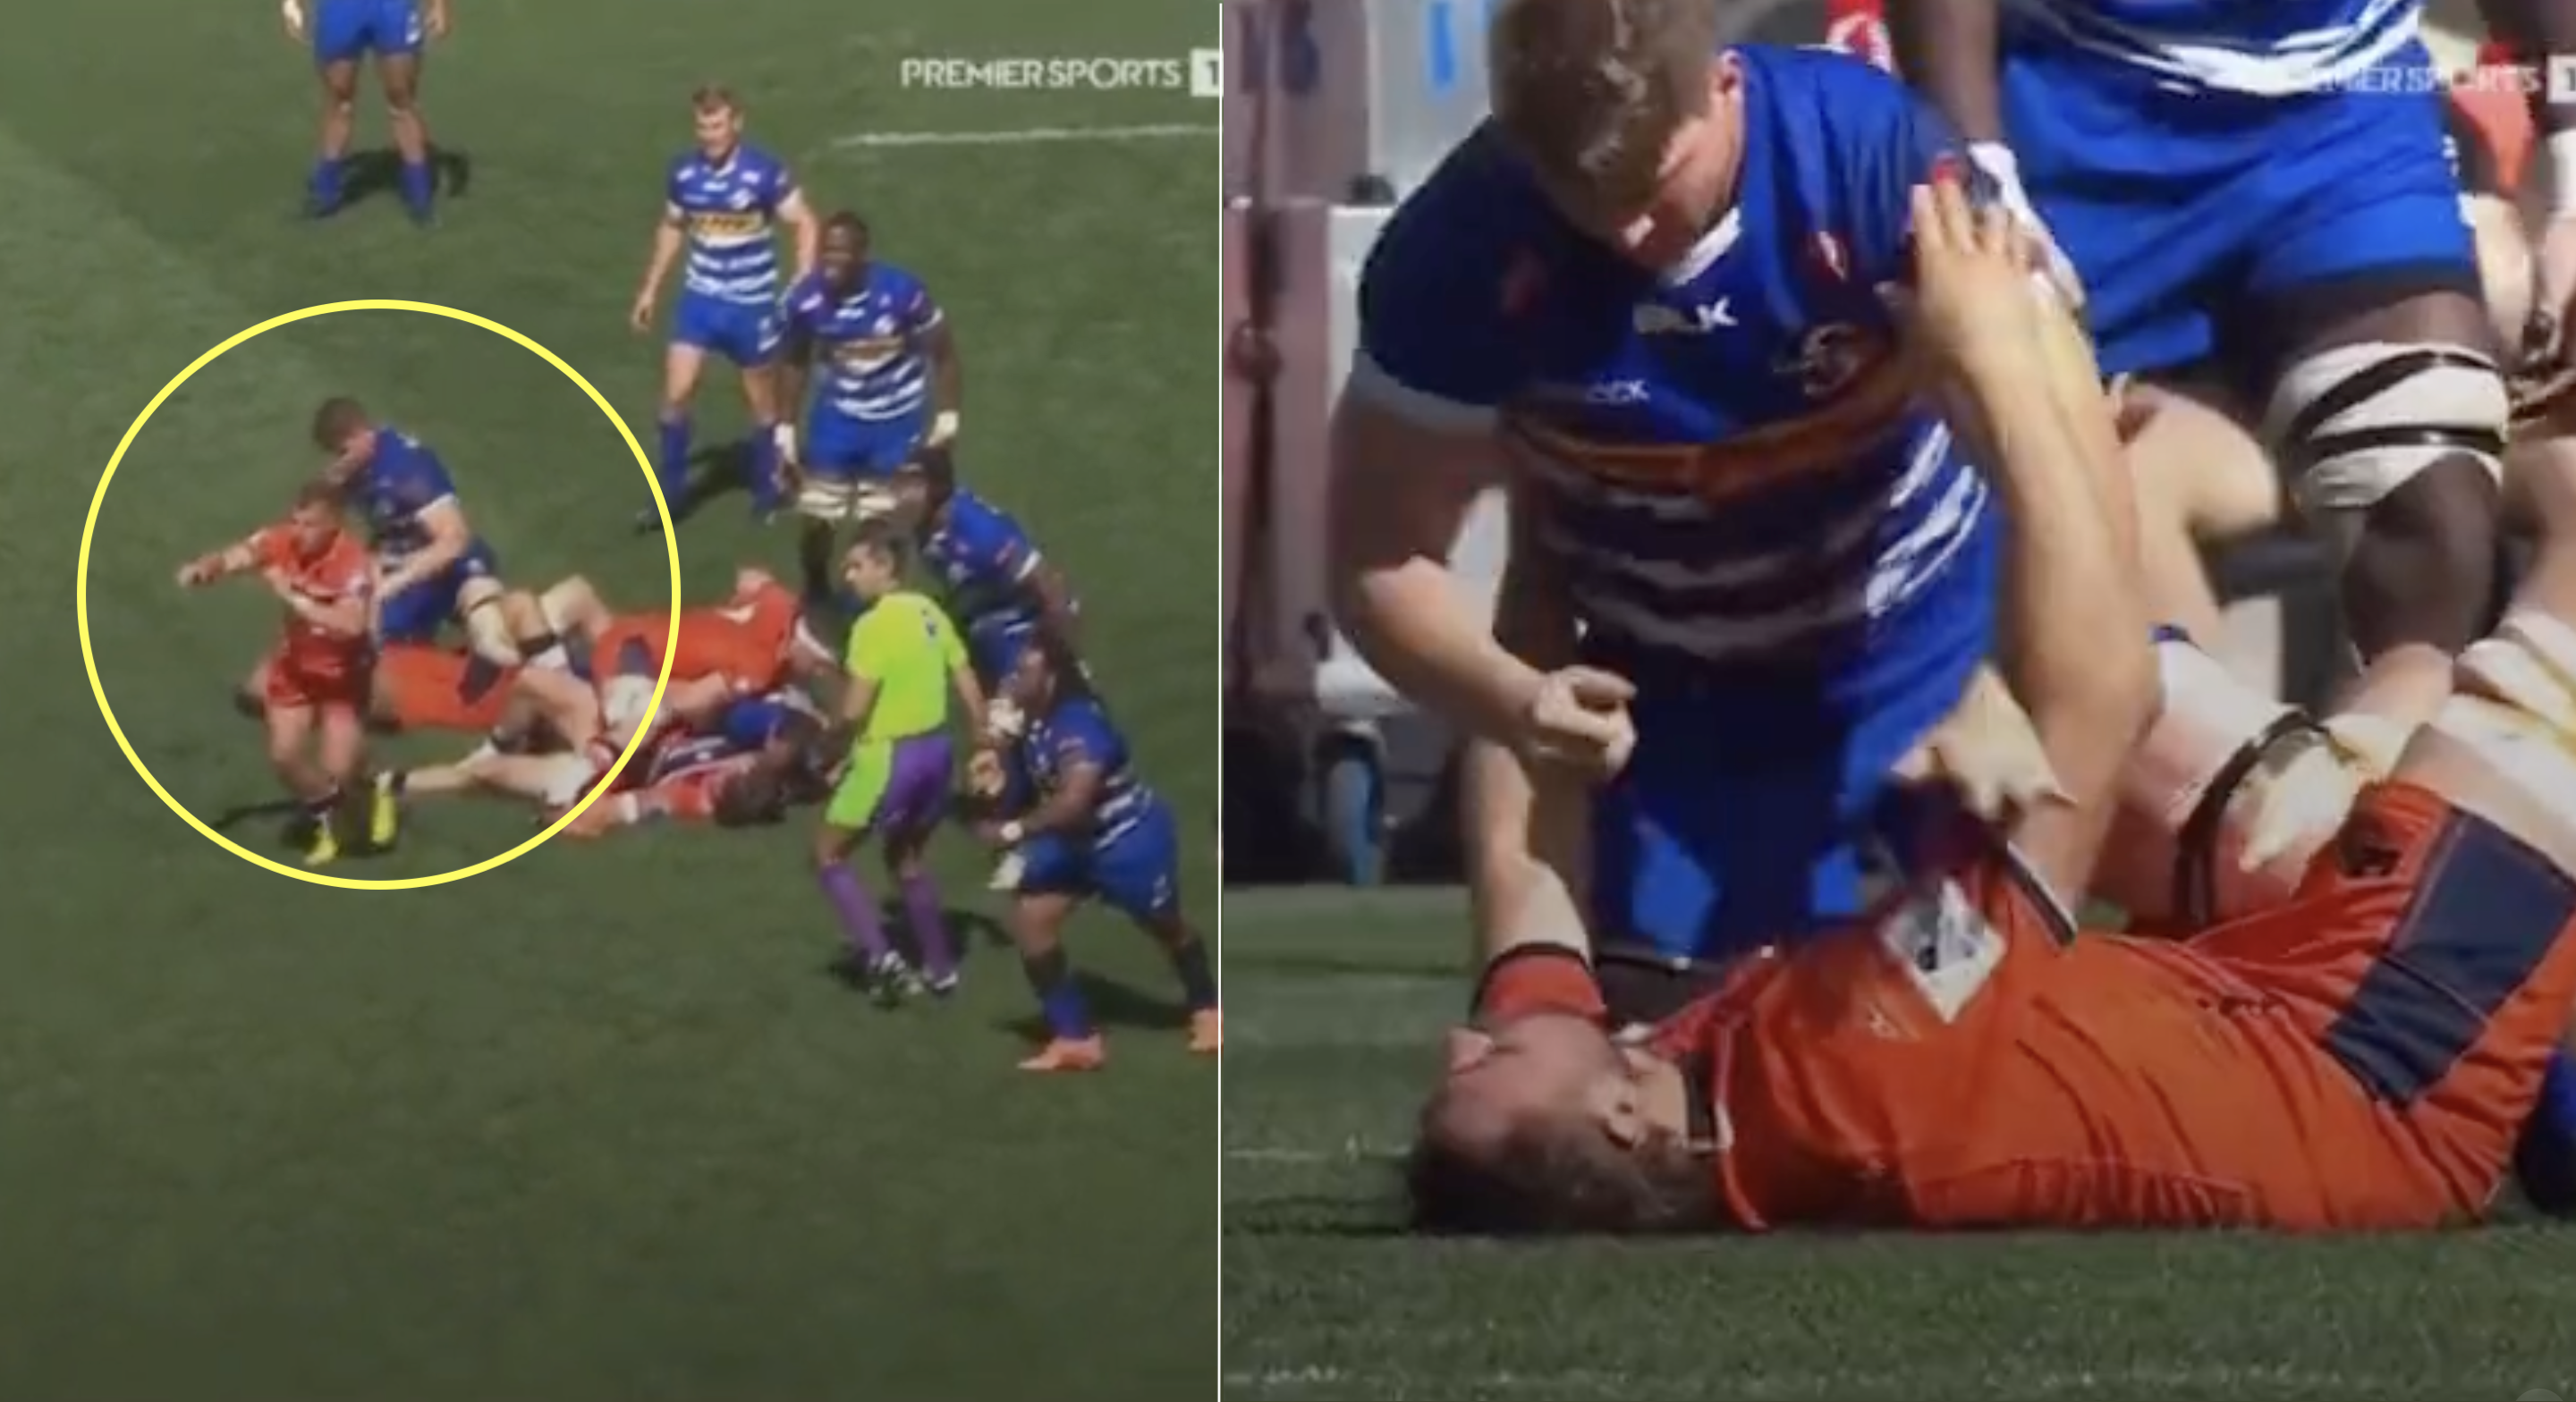 Evan Roos proves he's the ultimate Springbok with nasty cheap shot